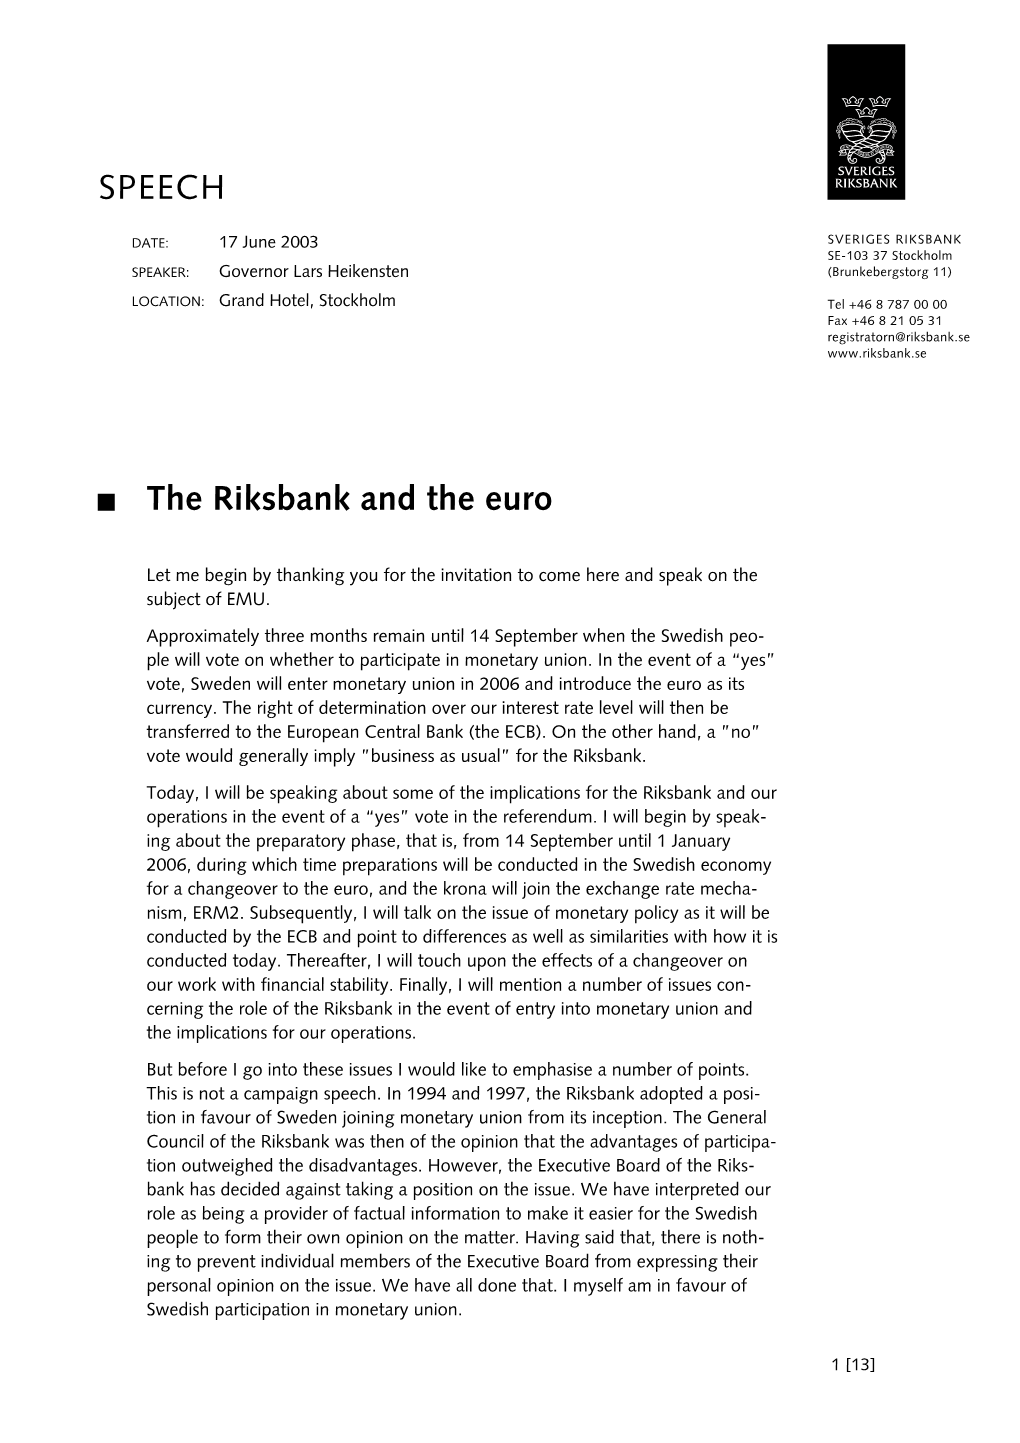 SPEECH the Riksbank and the Euro